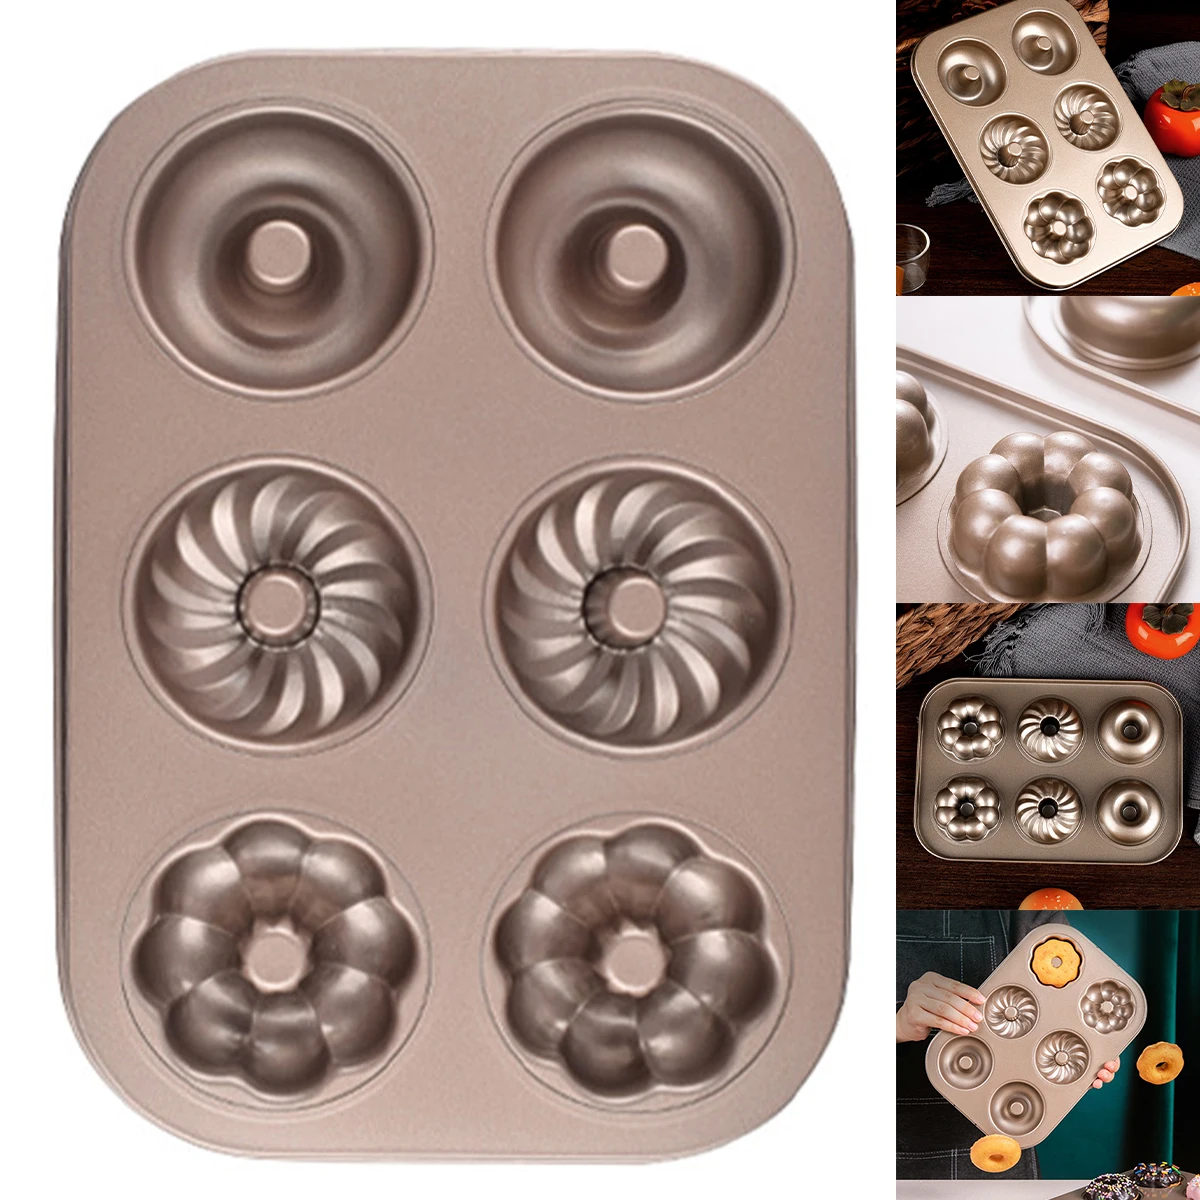 

Donut Mold Cake Pan 6-Cavity Non-Stick Pattern Doughnut Bakeware Heavy-Duty Carbon Steel Cake Mold Heat-Resistant Fluted Flower